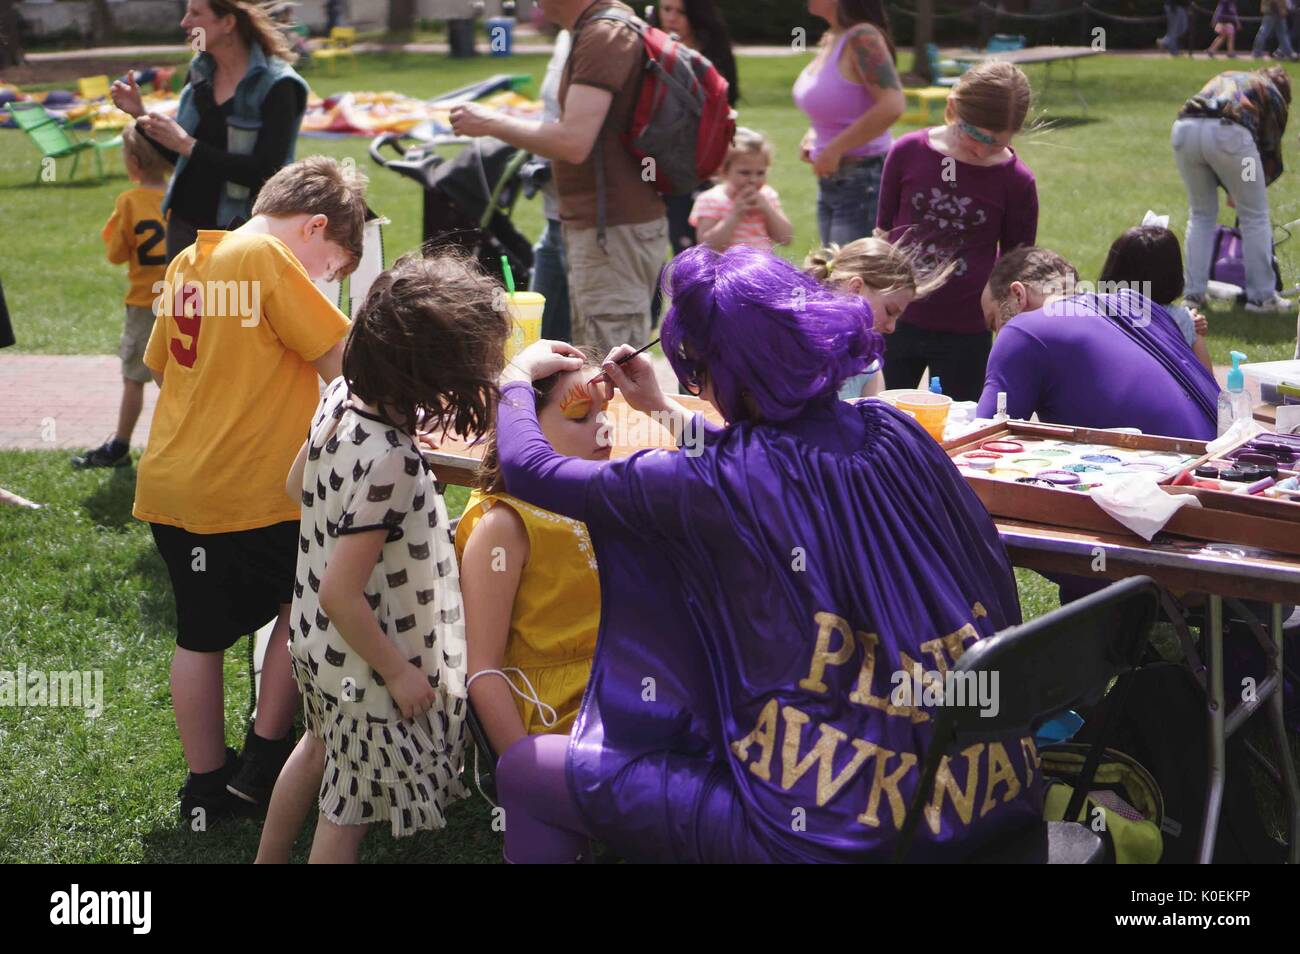 A woman and man wearing purple superhero costumes, including cape and wig, paint designs onto the faces of young children during Spring Fair, a student-run spring carnival at Johns Hopkins University, Baltimore, Maryland, April, 2014. Courtesy Eric Chen. Stock Photo